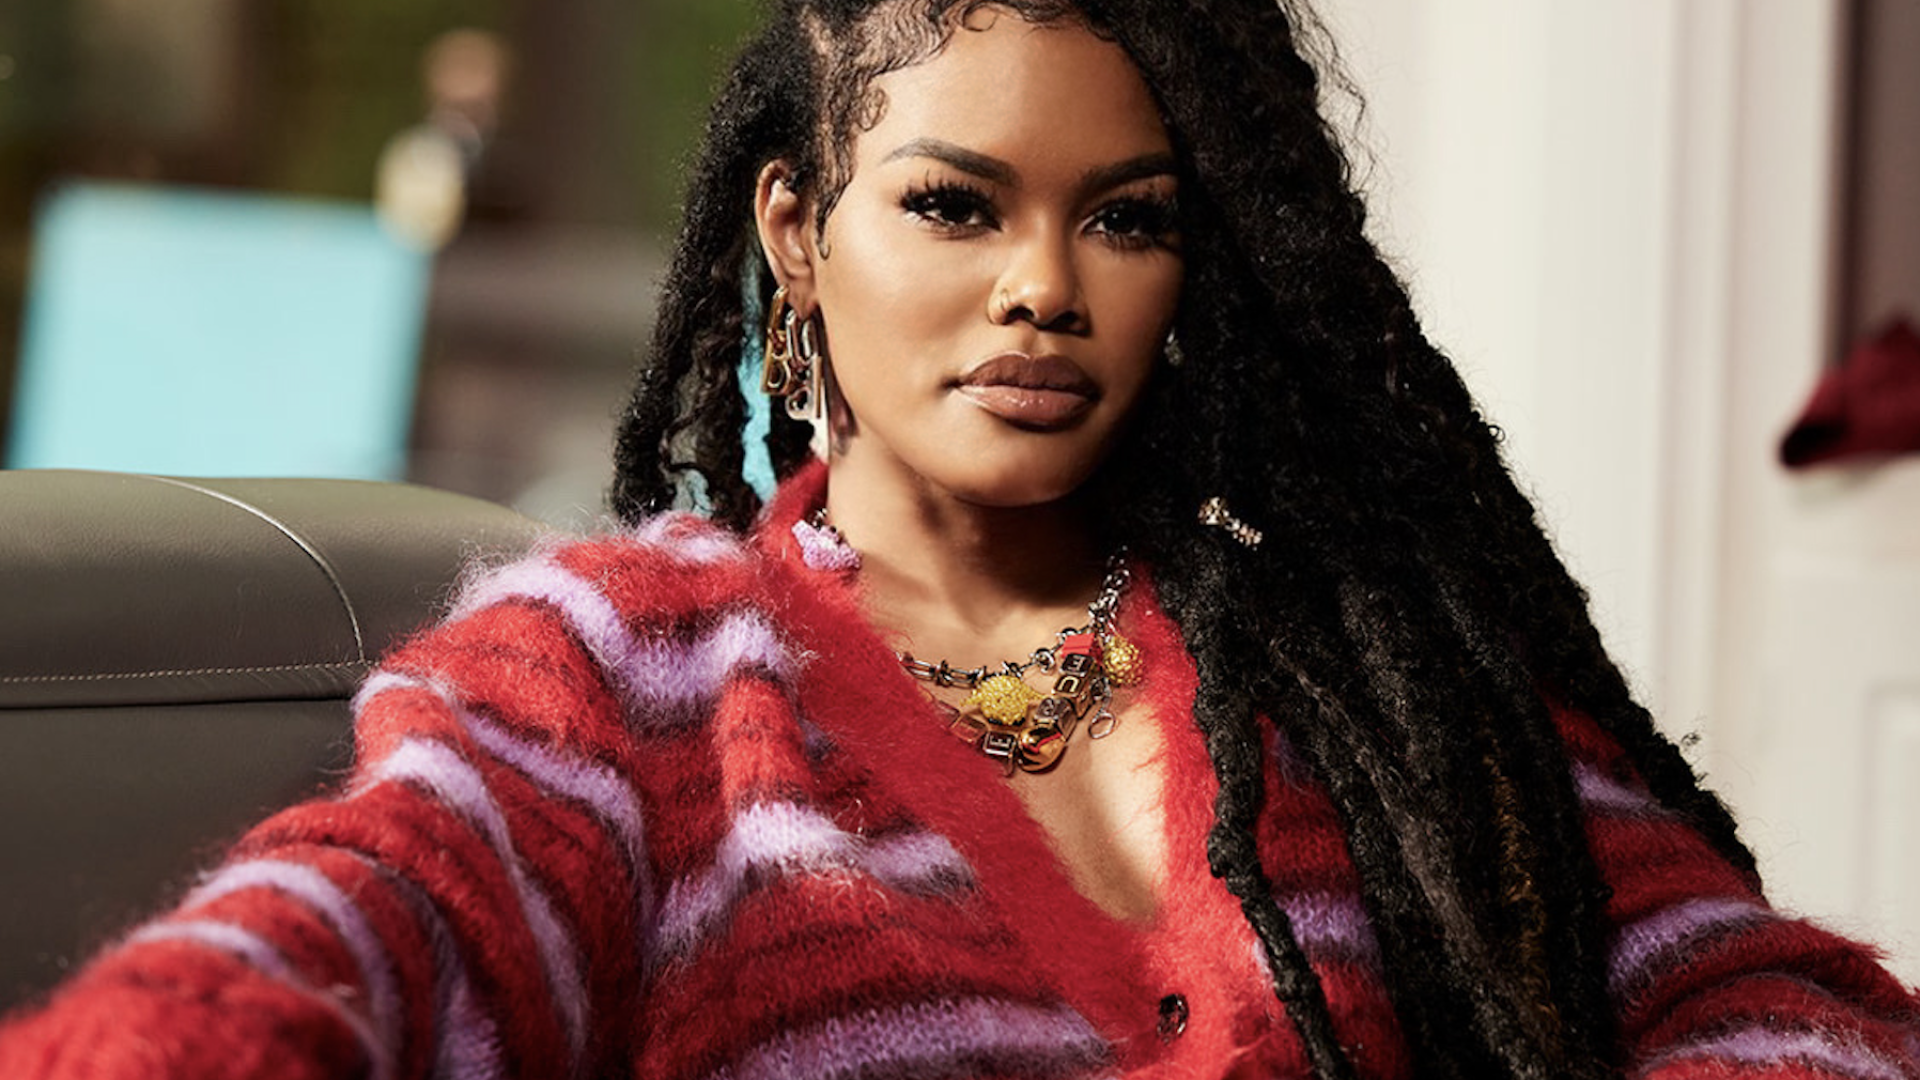 Teyana Taylor Opens Up About Facial Injectables: 'It Was Super Quick And Wasn't Even Really That Painful'